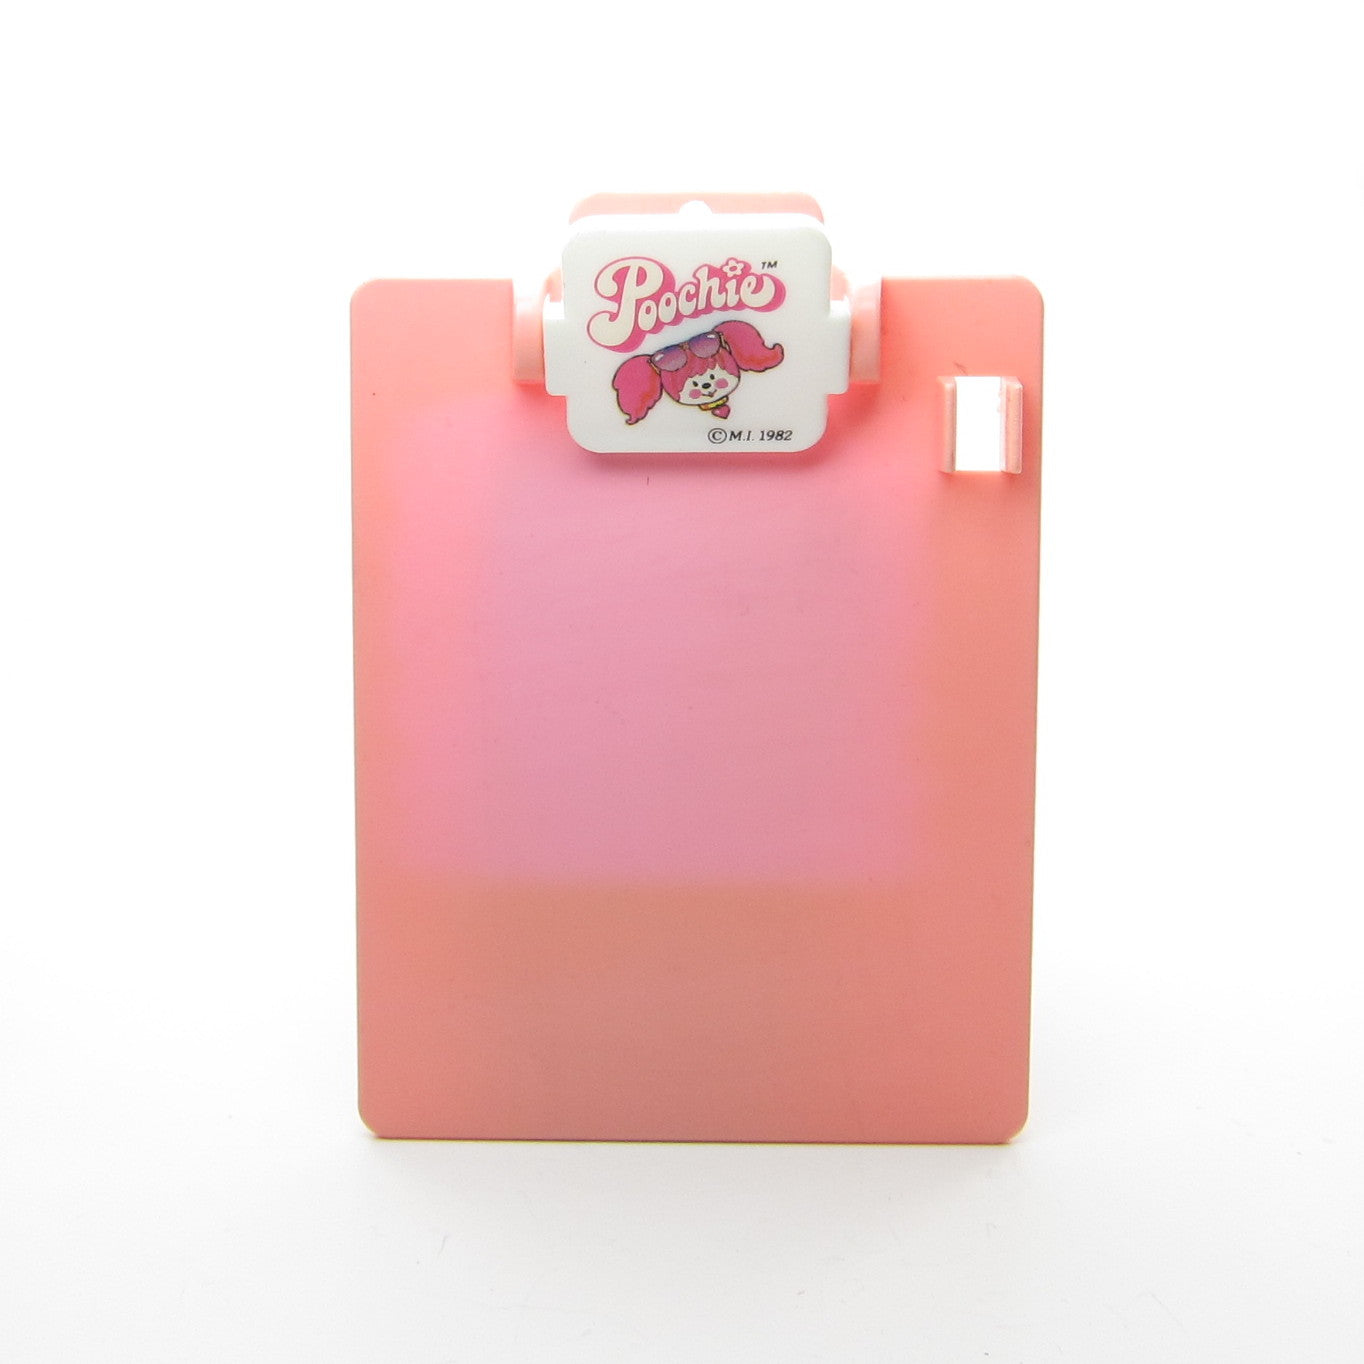 Poochie pink plastic clipboard from note writer set